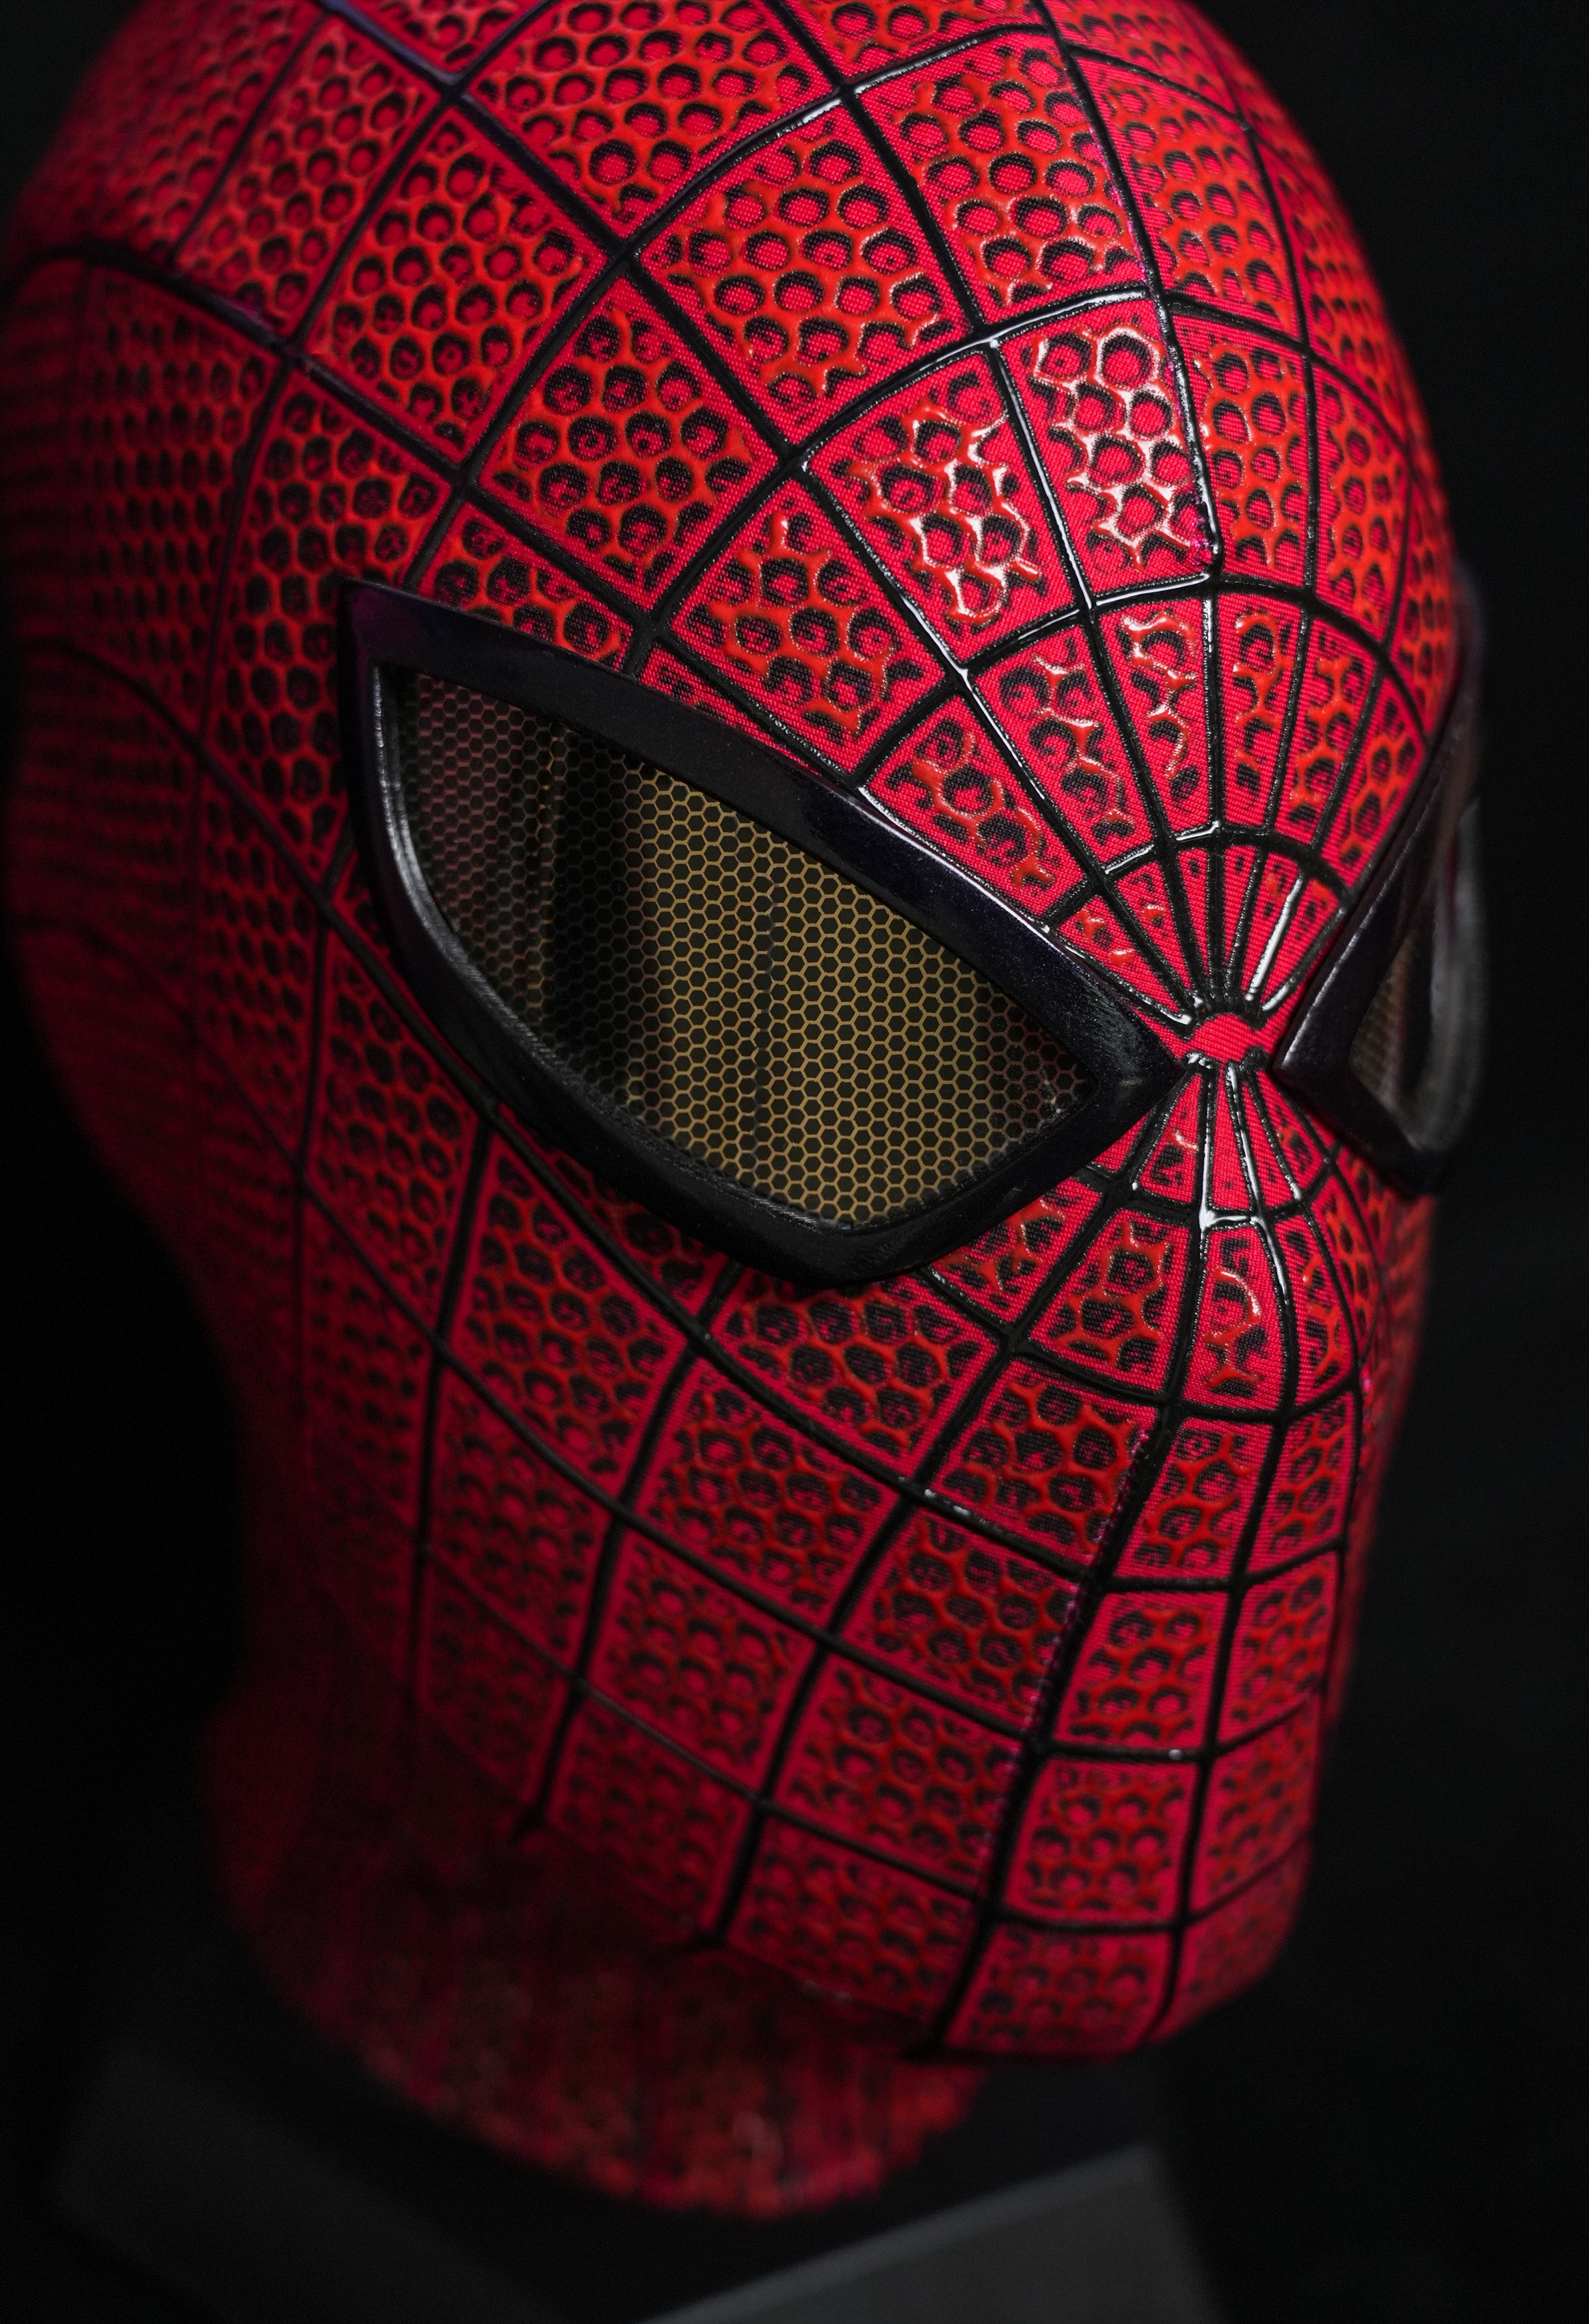 TASM 1 mask (Andrew) with Faceshell and Lenses Wearable Movie Prop Replica (Adult)